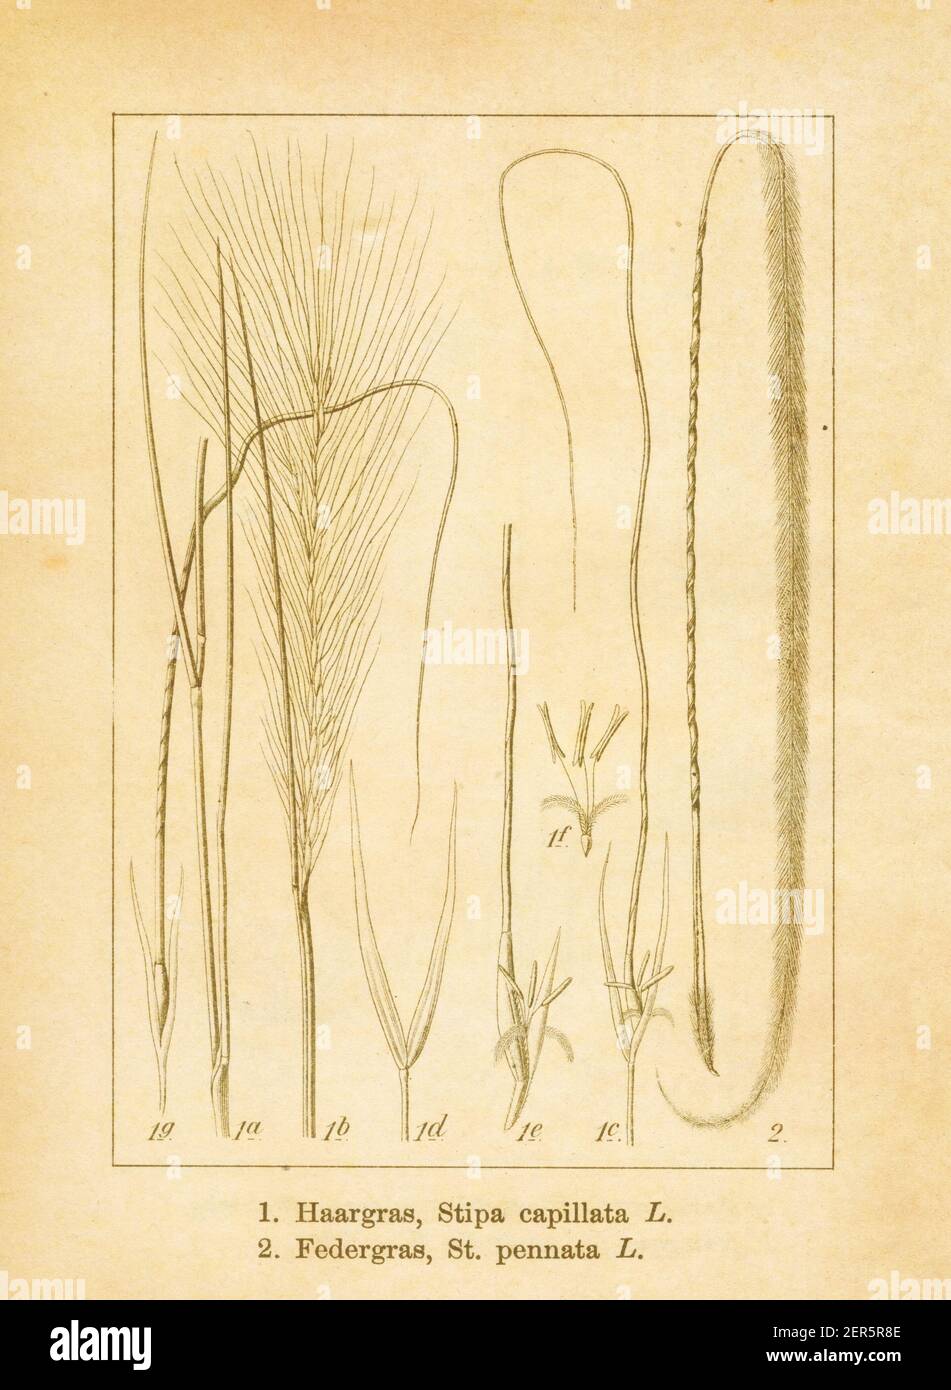 Antique illustration of a stipa capillata and stipa pennata (also known as feather grass or European feather grass). Engraved by Jacob Sturm (1771-184 Stock Photo